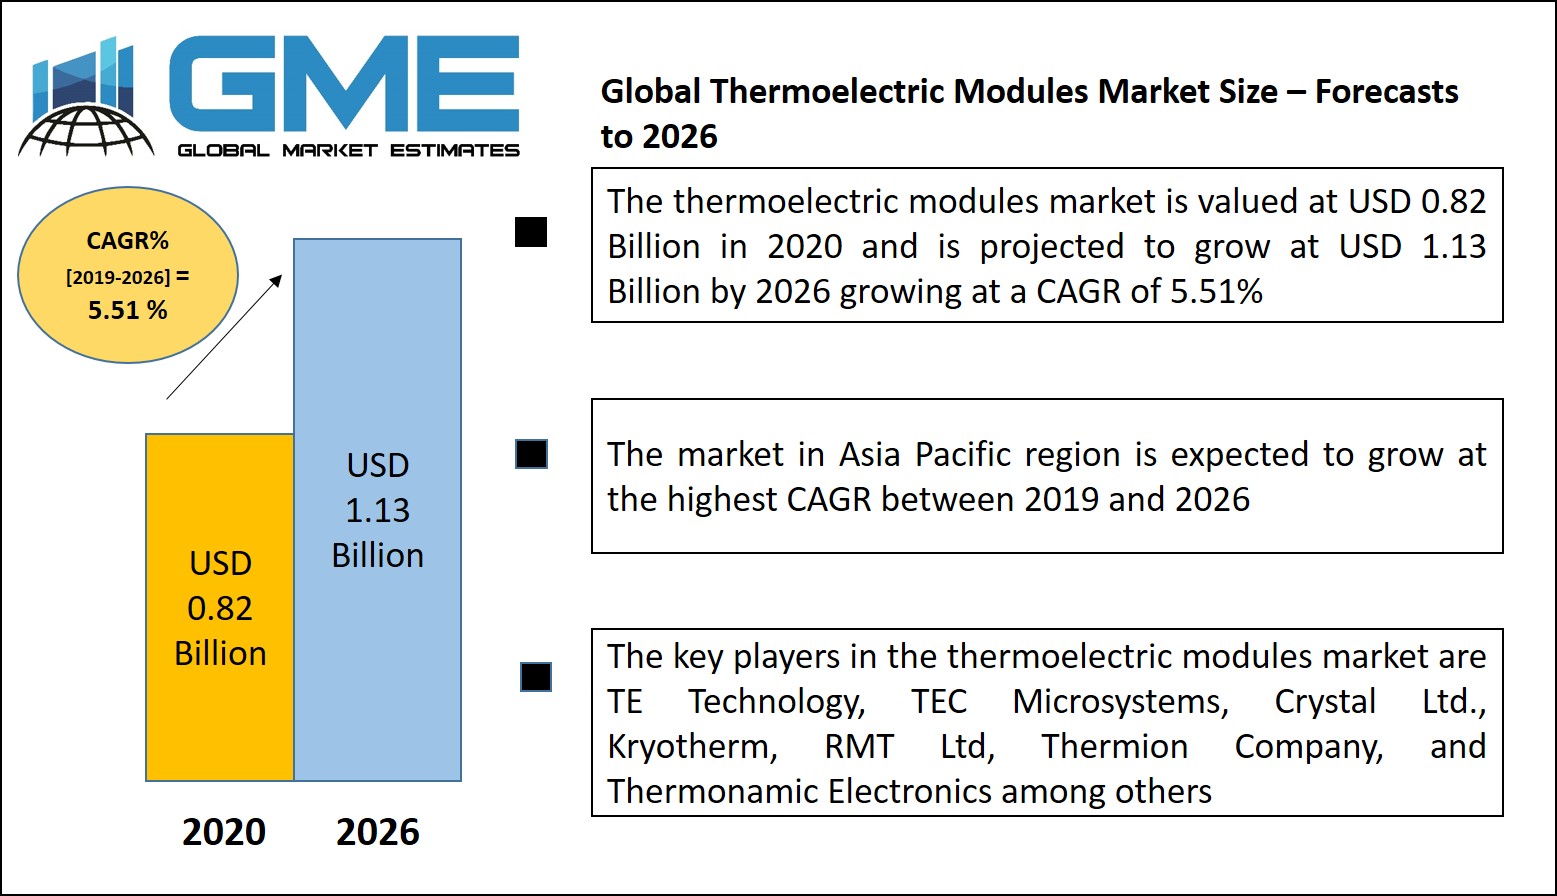 Global Thermoelectric Modules Market Size – Forecasts to 2026